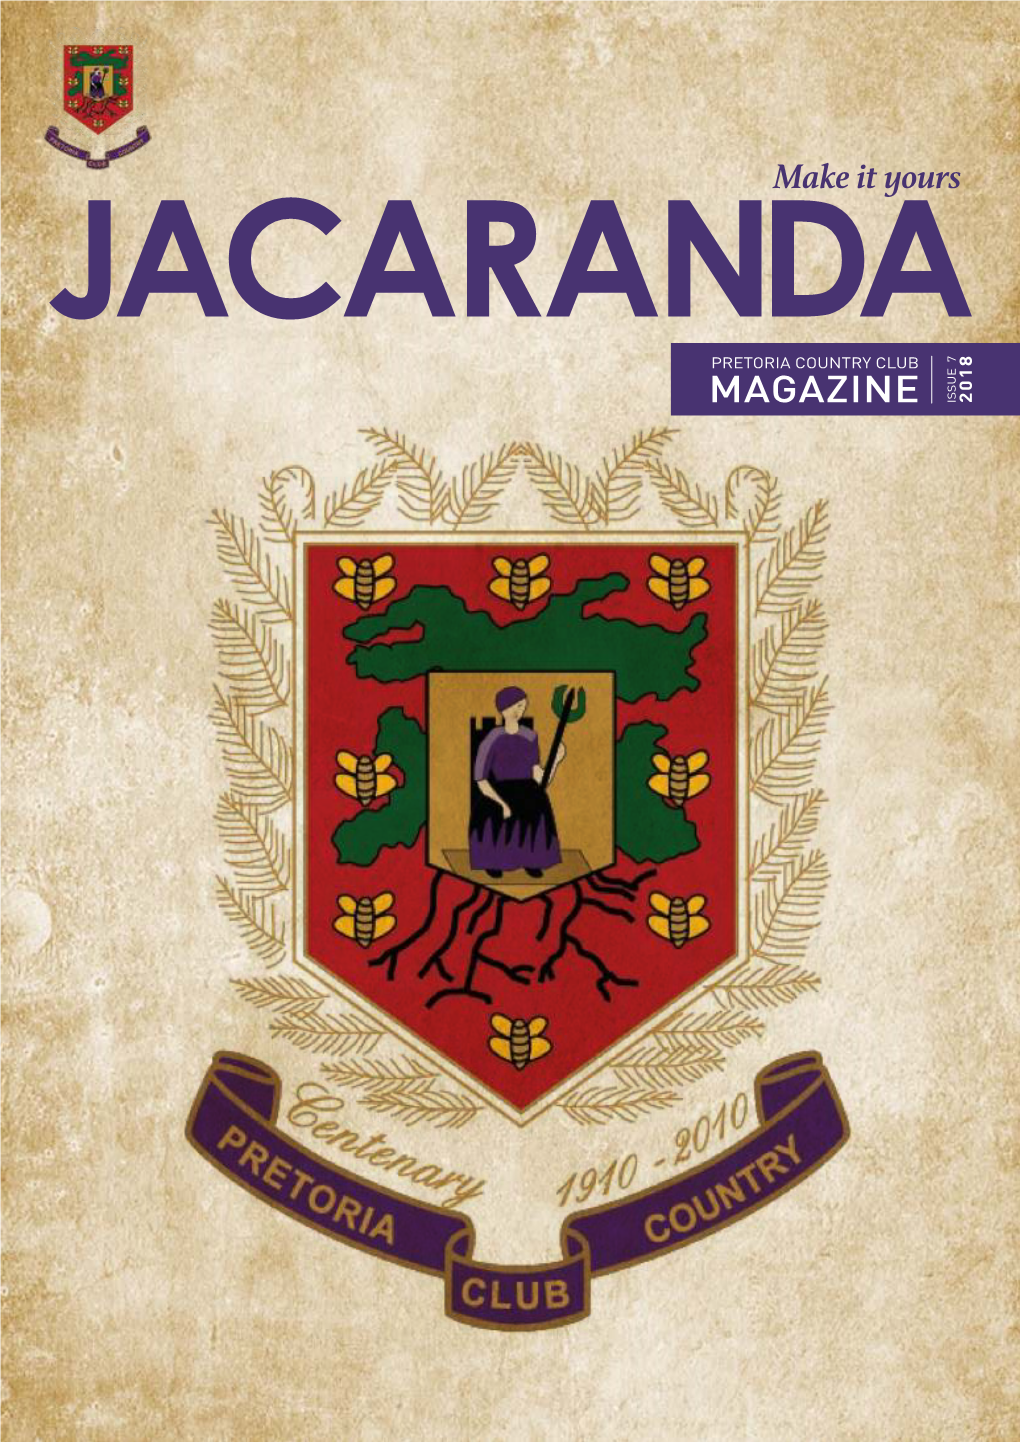 Magazine Issue 7 Issue 2018 the History of the Coat of Arms